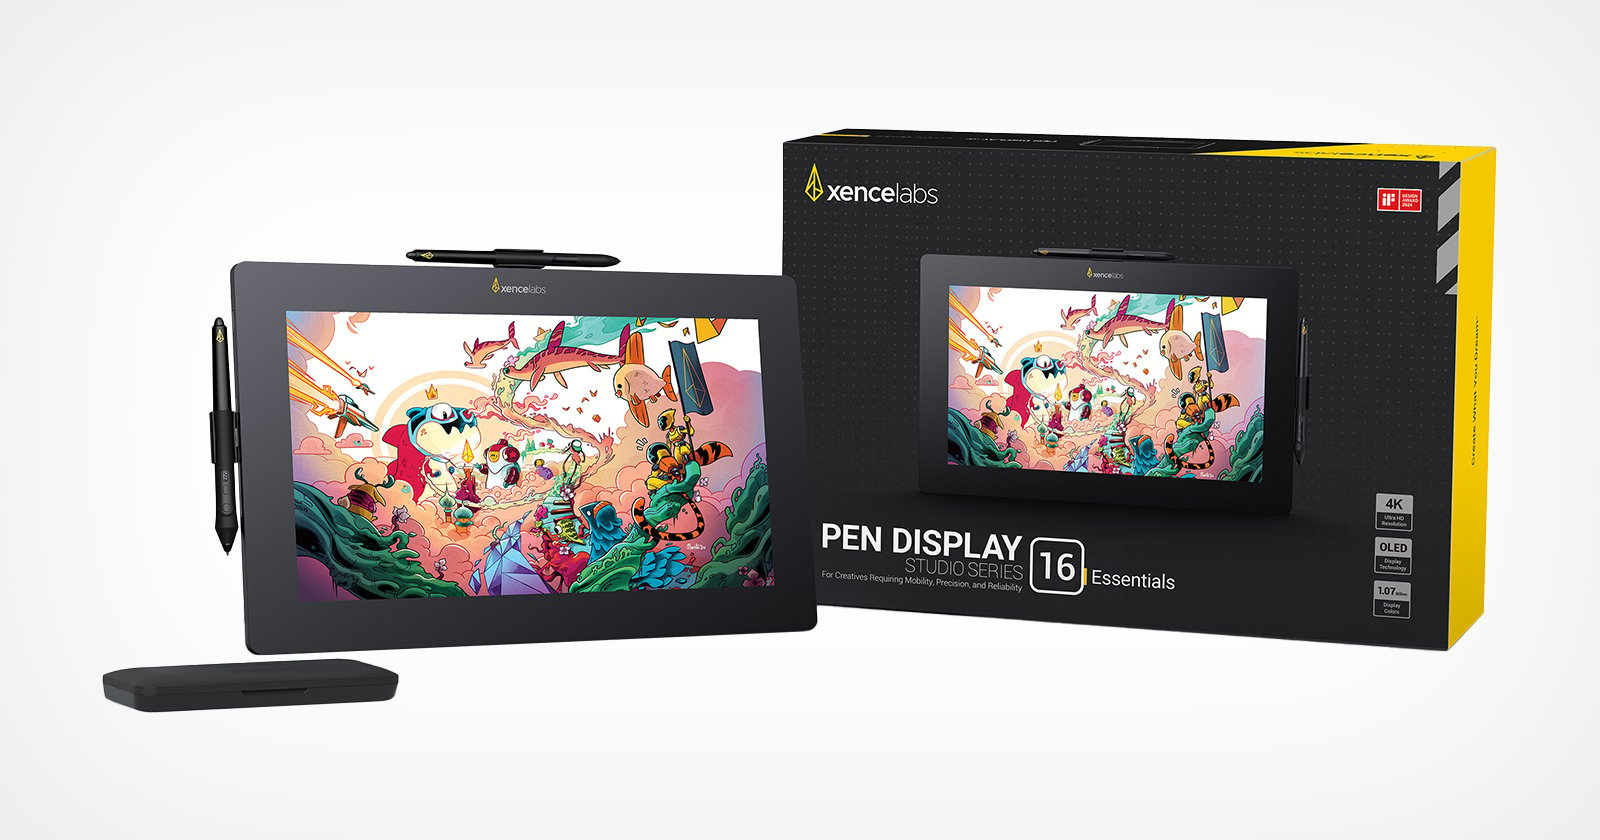 The Xencelabs 4K OLED Pen Display 16 is Light, Bright, and Portable